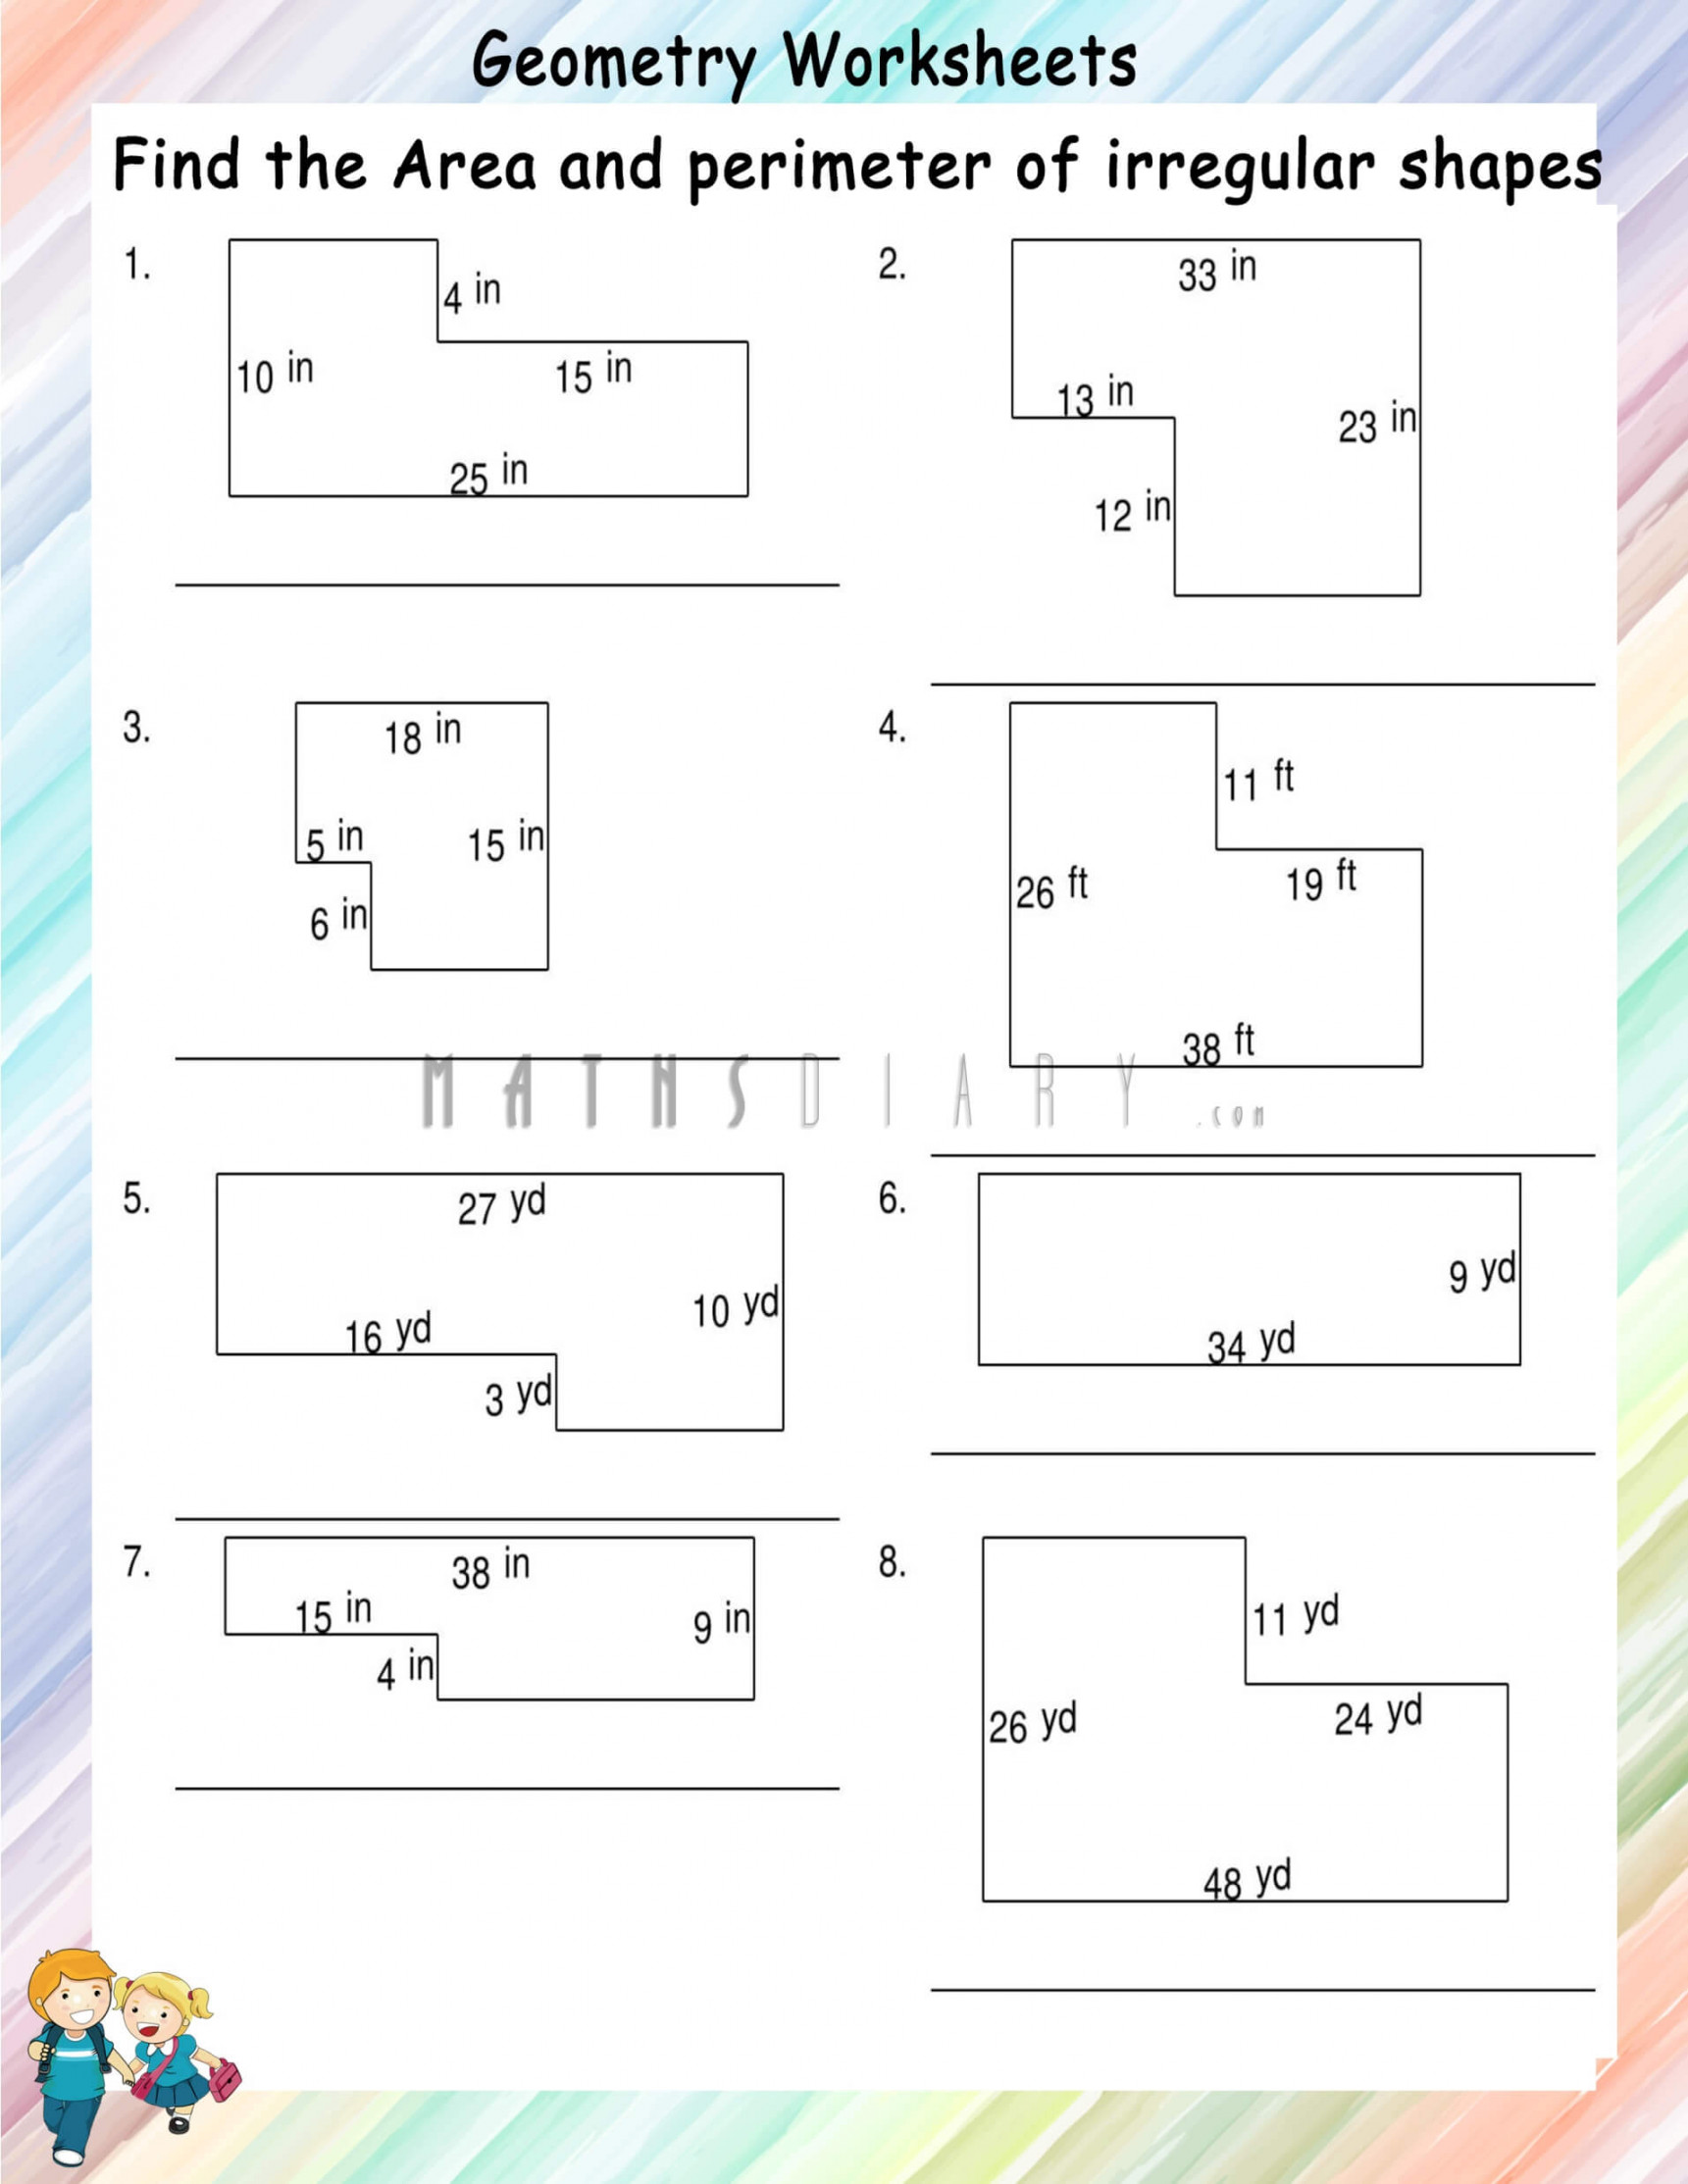 Finding Area and Perimeter of Irregular shapes - Math Worksheets